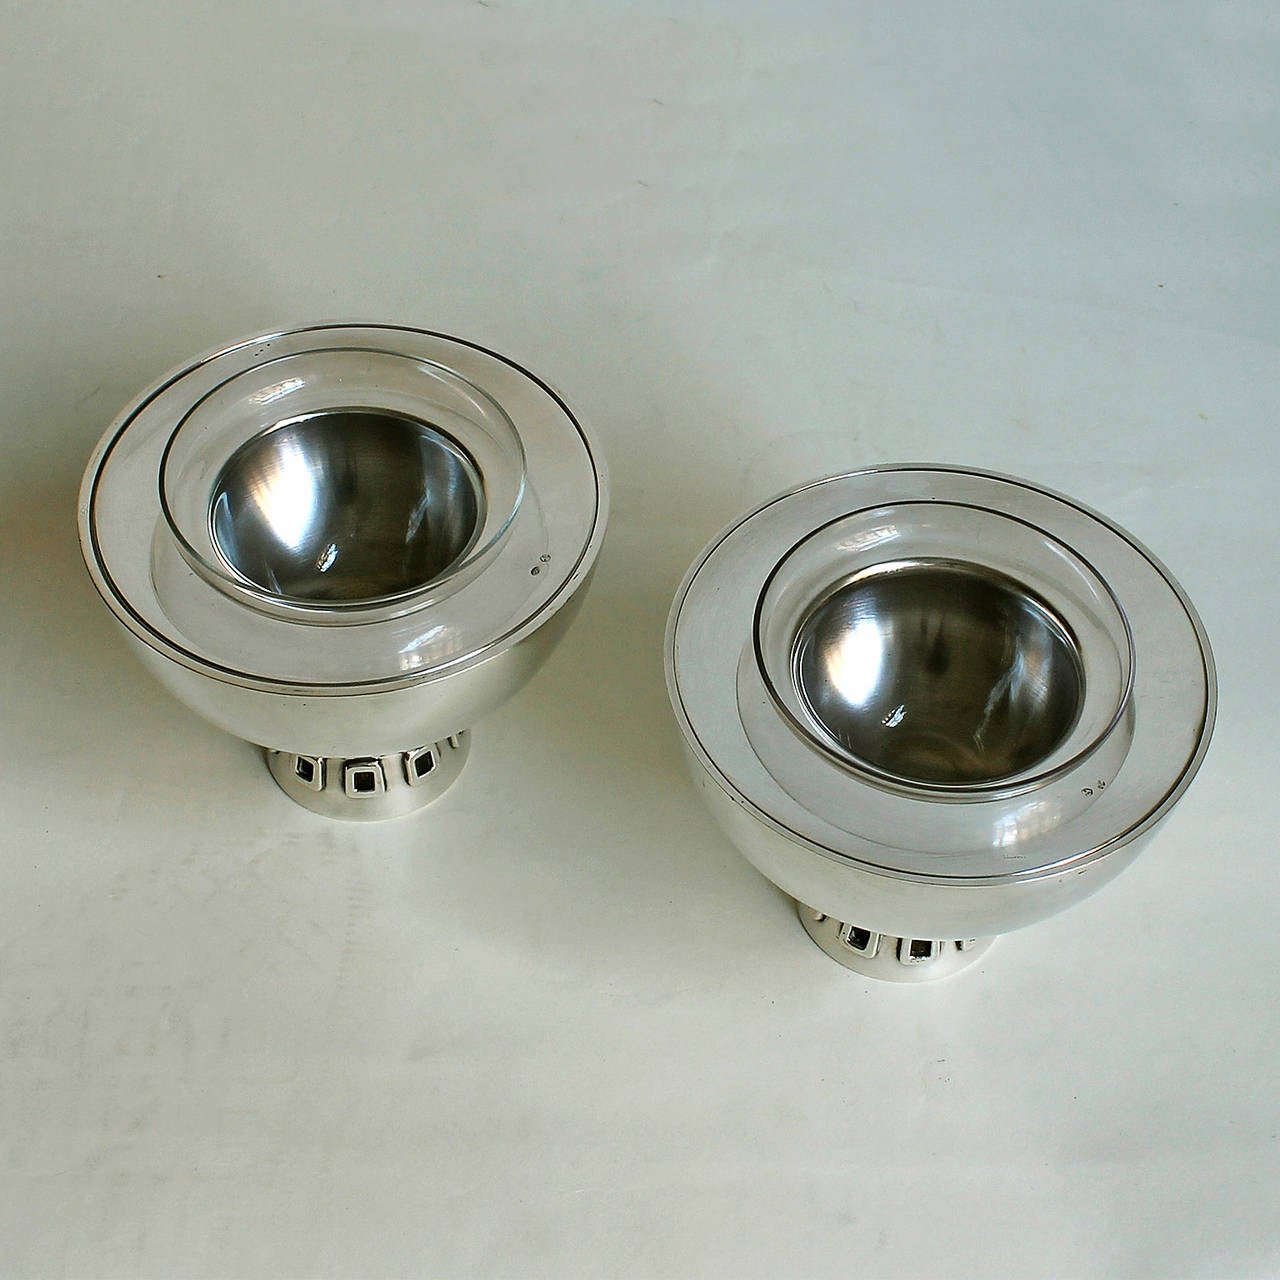 Spanish Pair of Mid-Century Modern Silver Caviar Bowls by Puig Doria - Spain For Sale